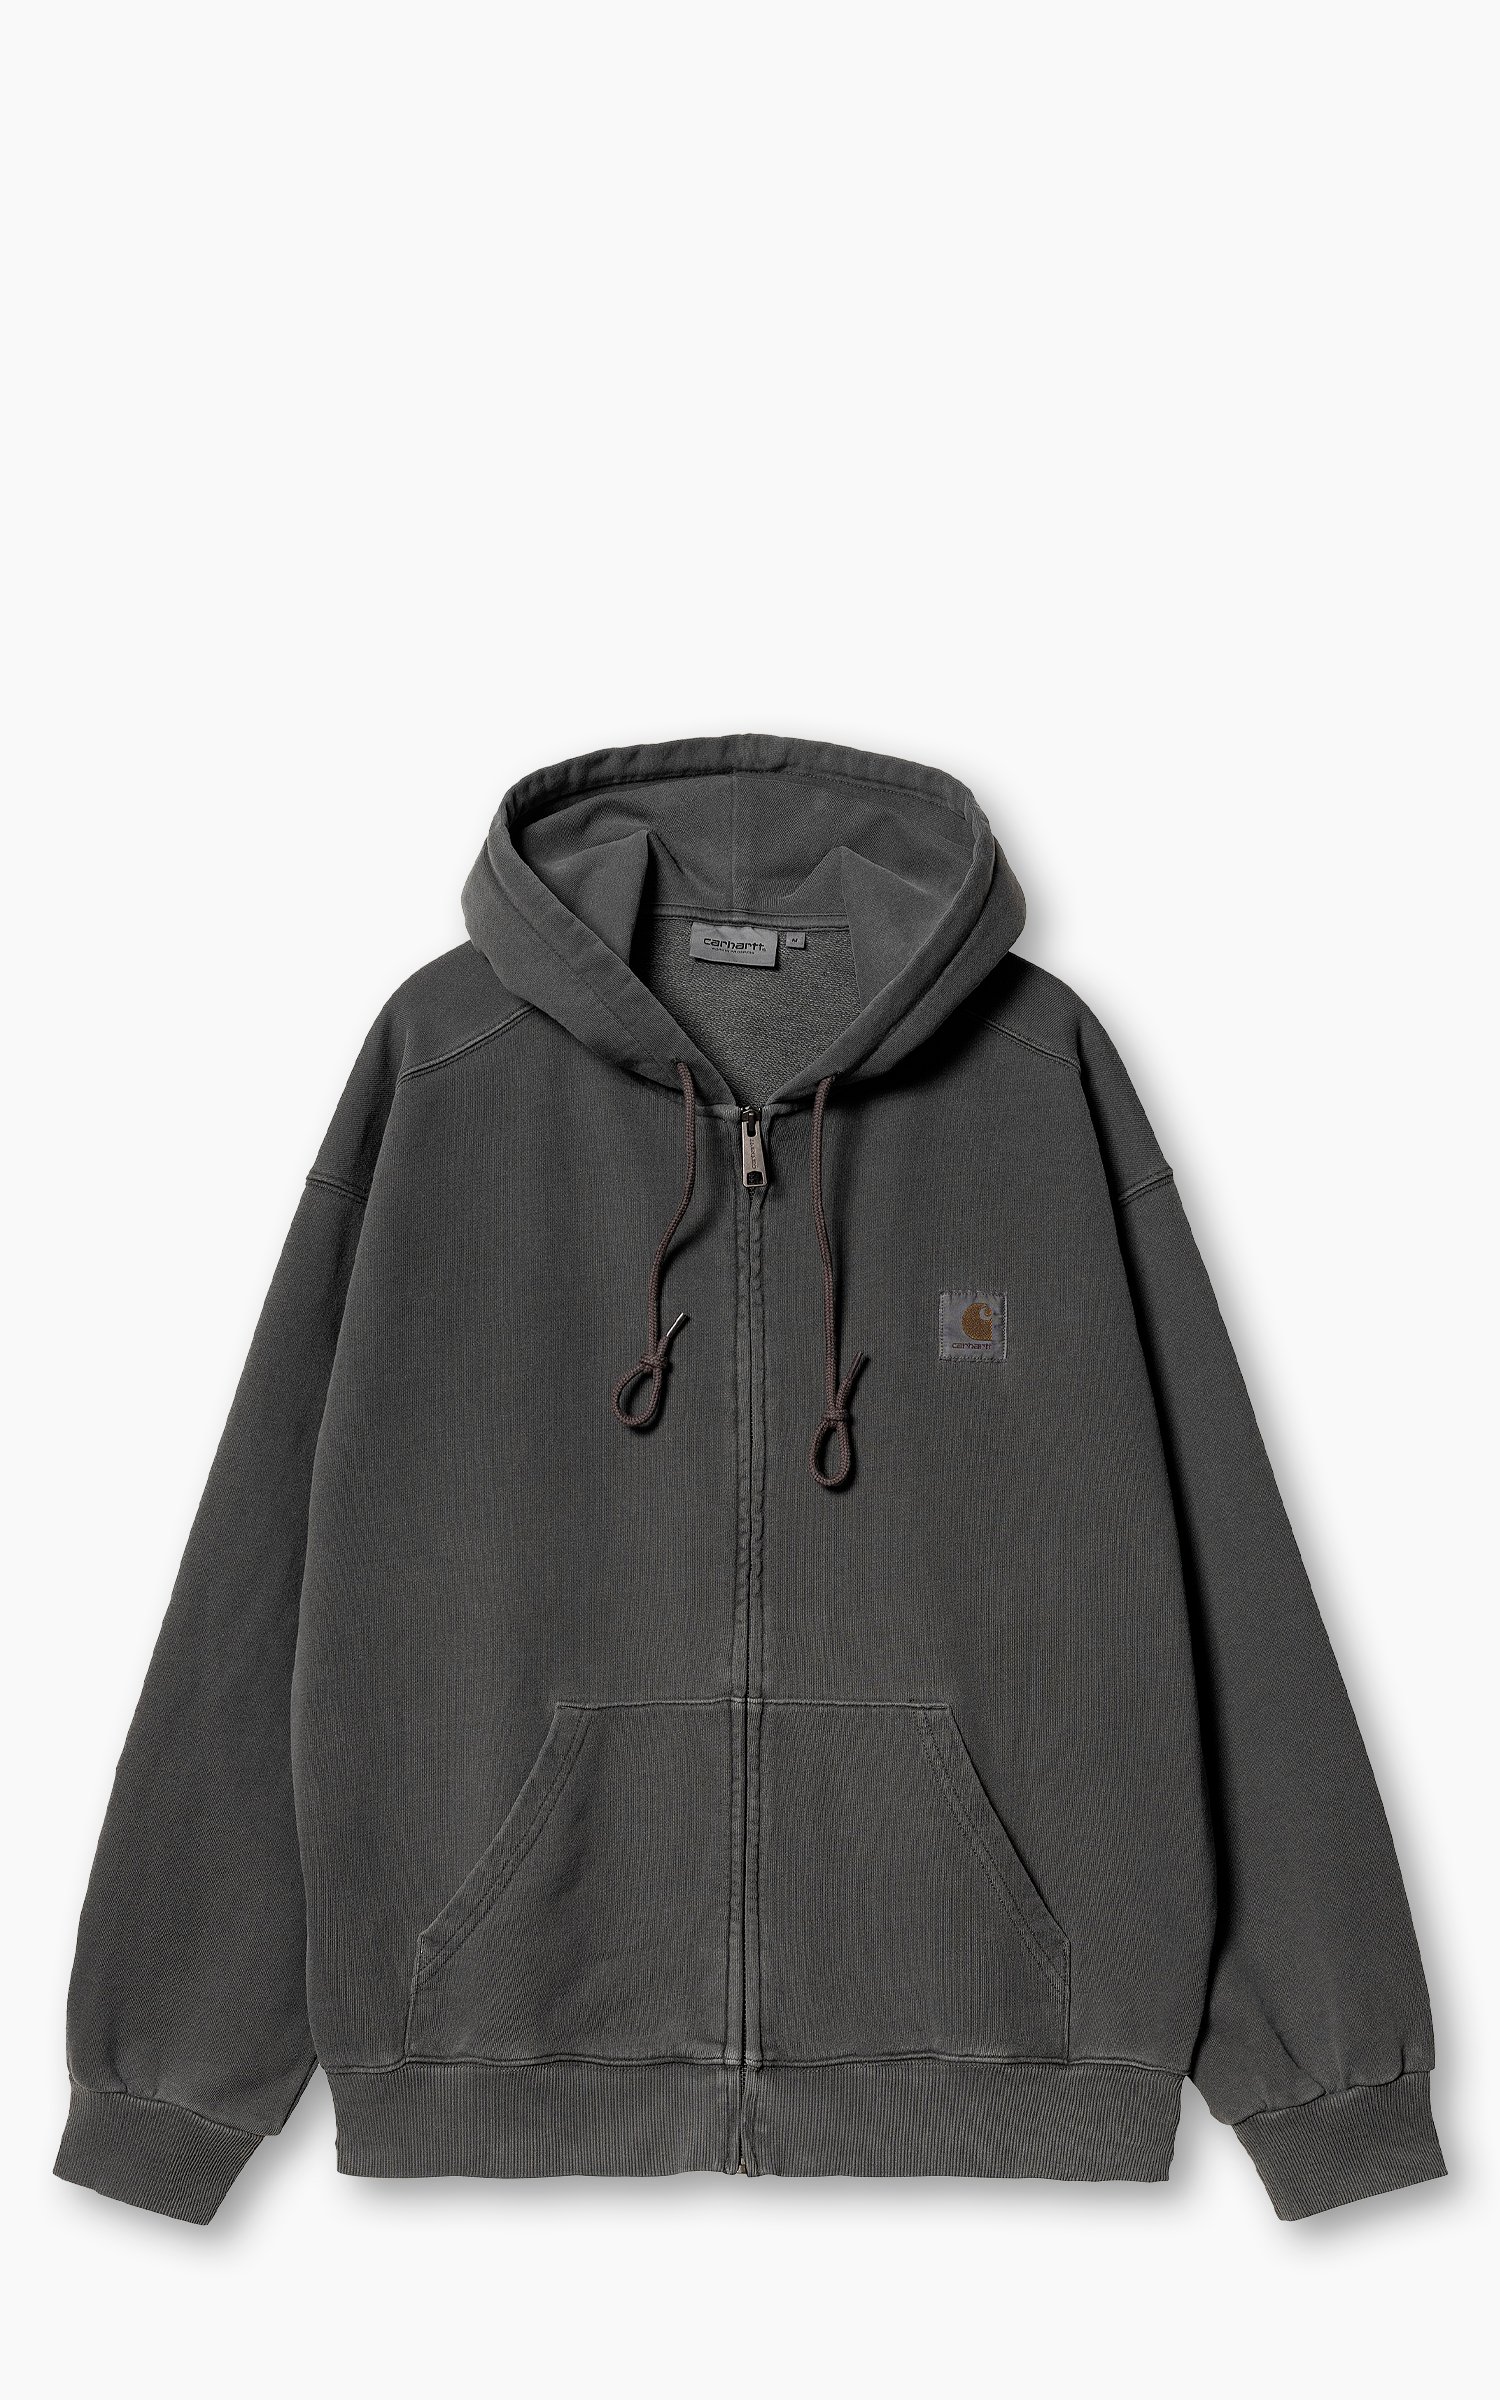 Carhartt WIP Hooded Nelson Jacket Charcoal | Cultizm